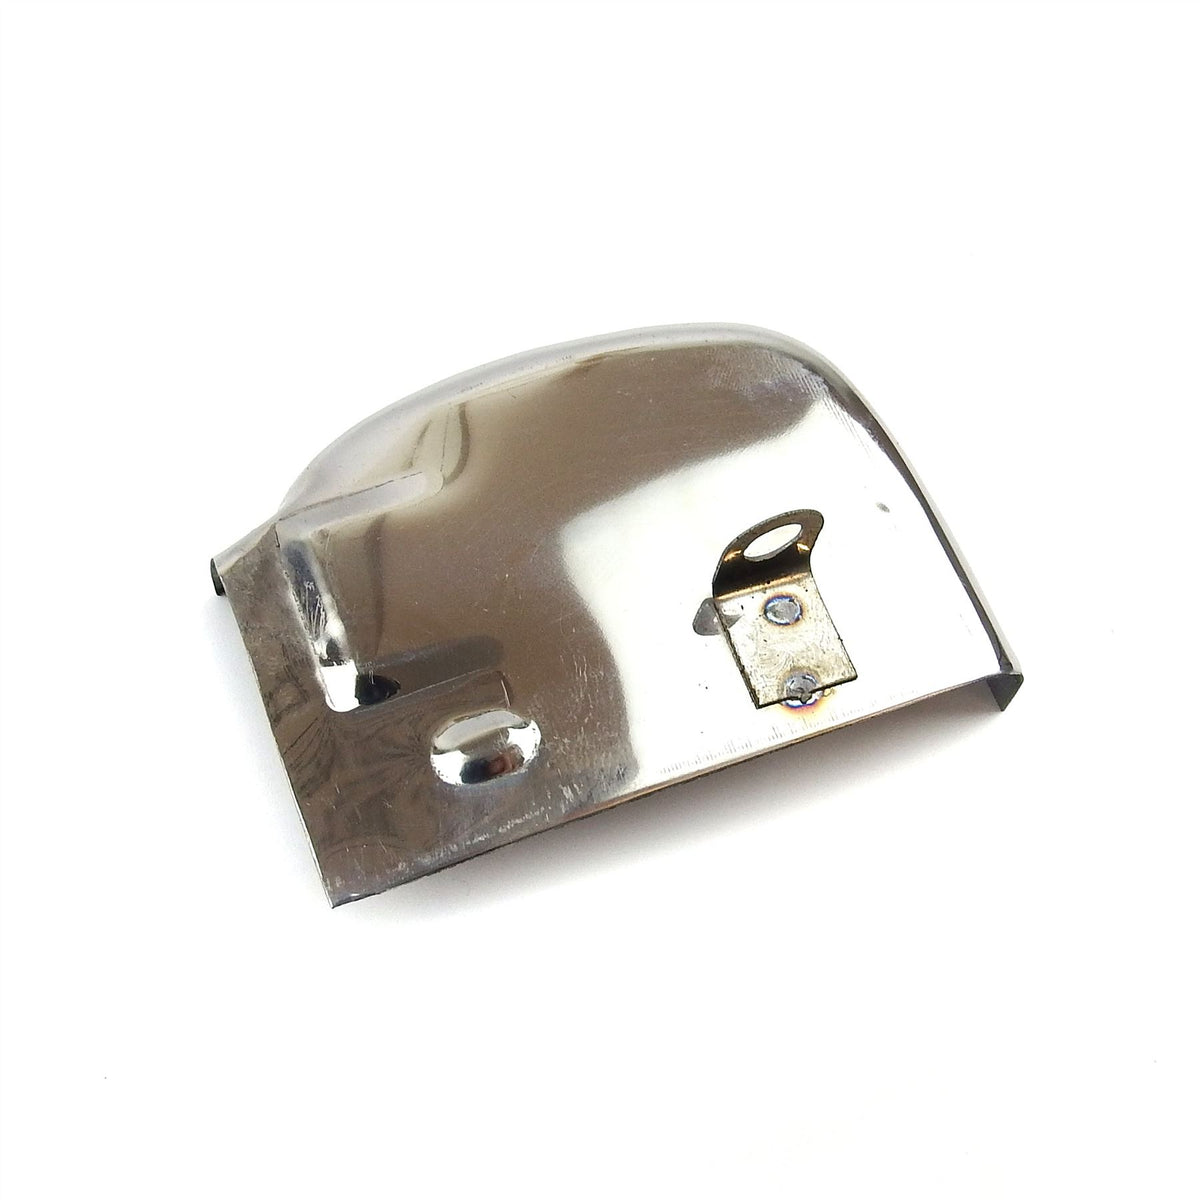 Vespa Super Sprint VBB Gear Selector Box Cover - Polished Stainless Steel